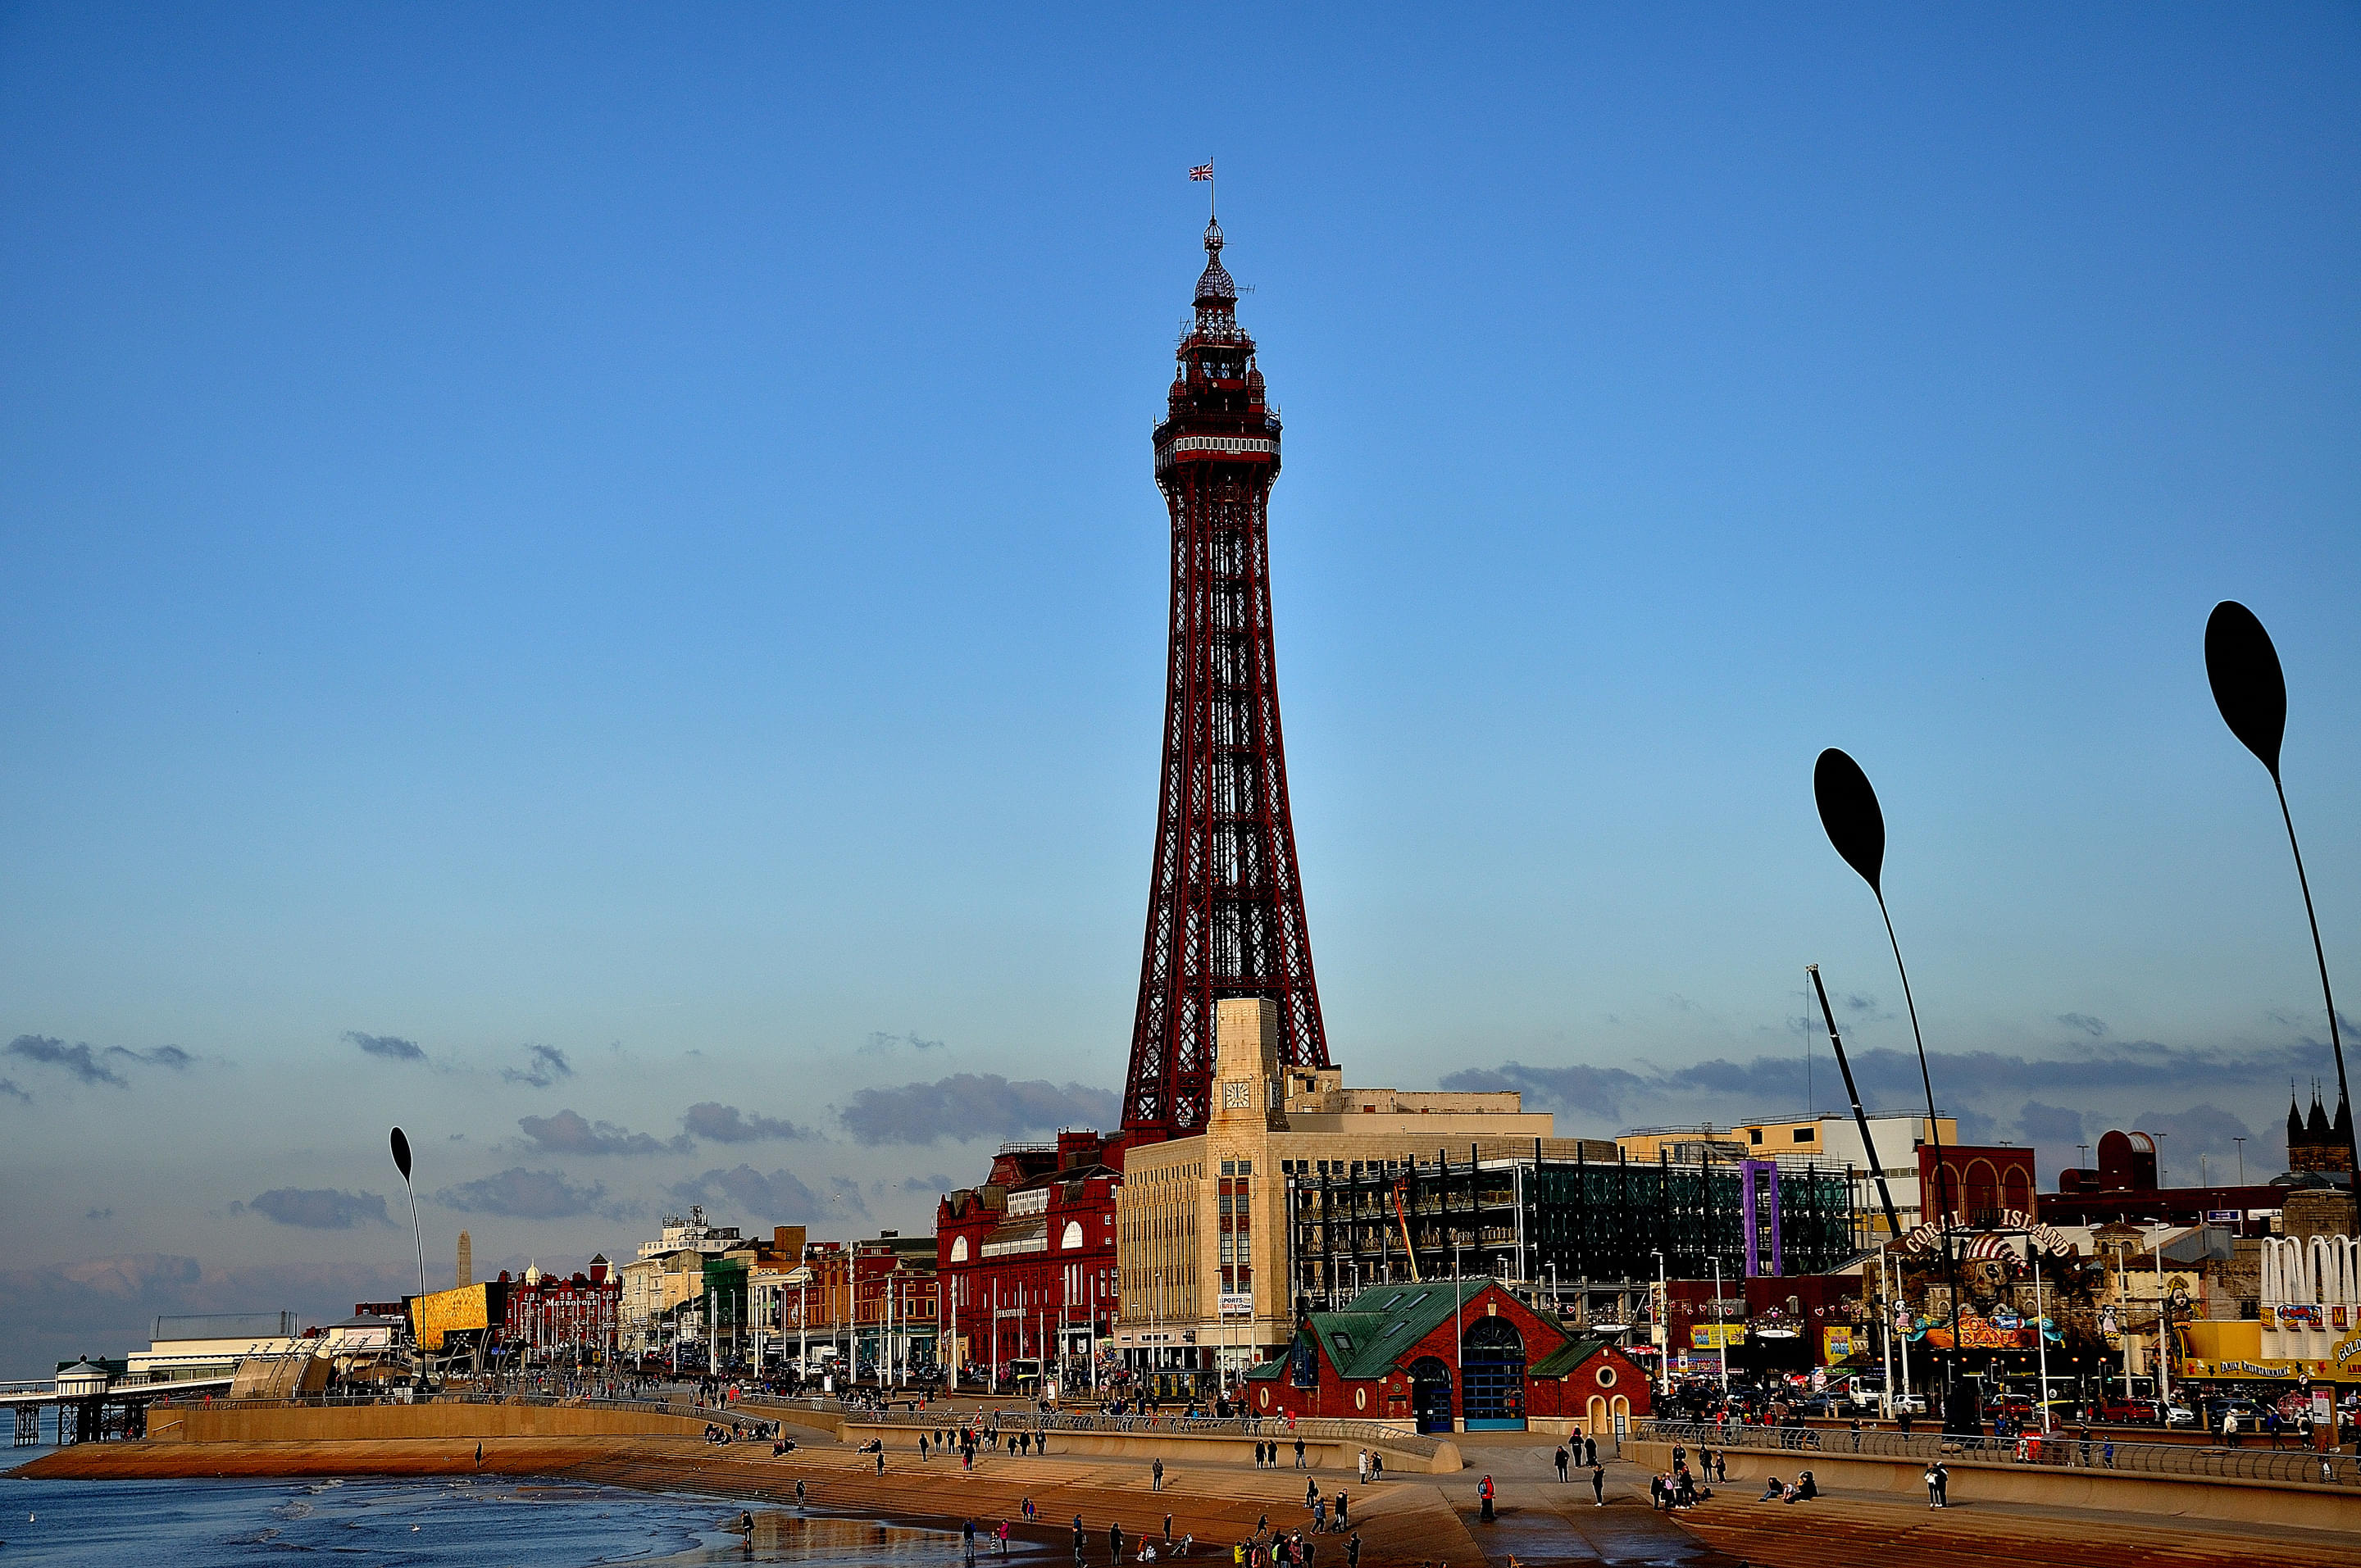 The Blackpool Tower Overview